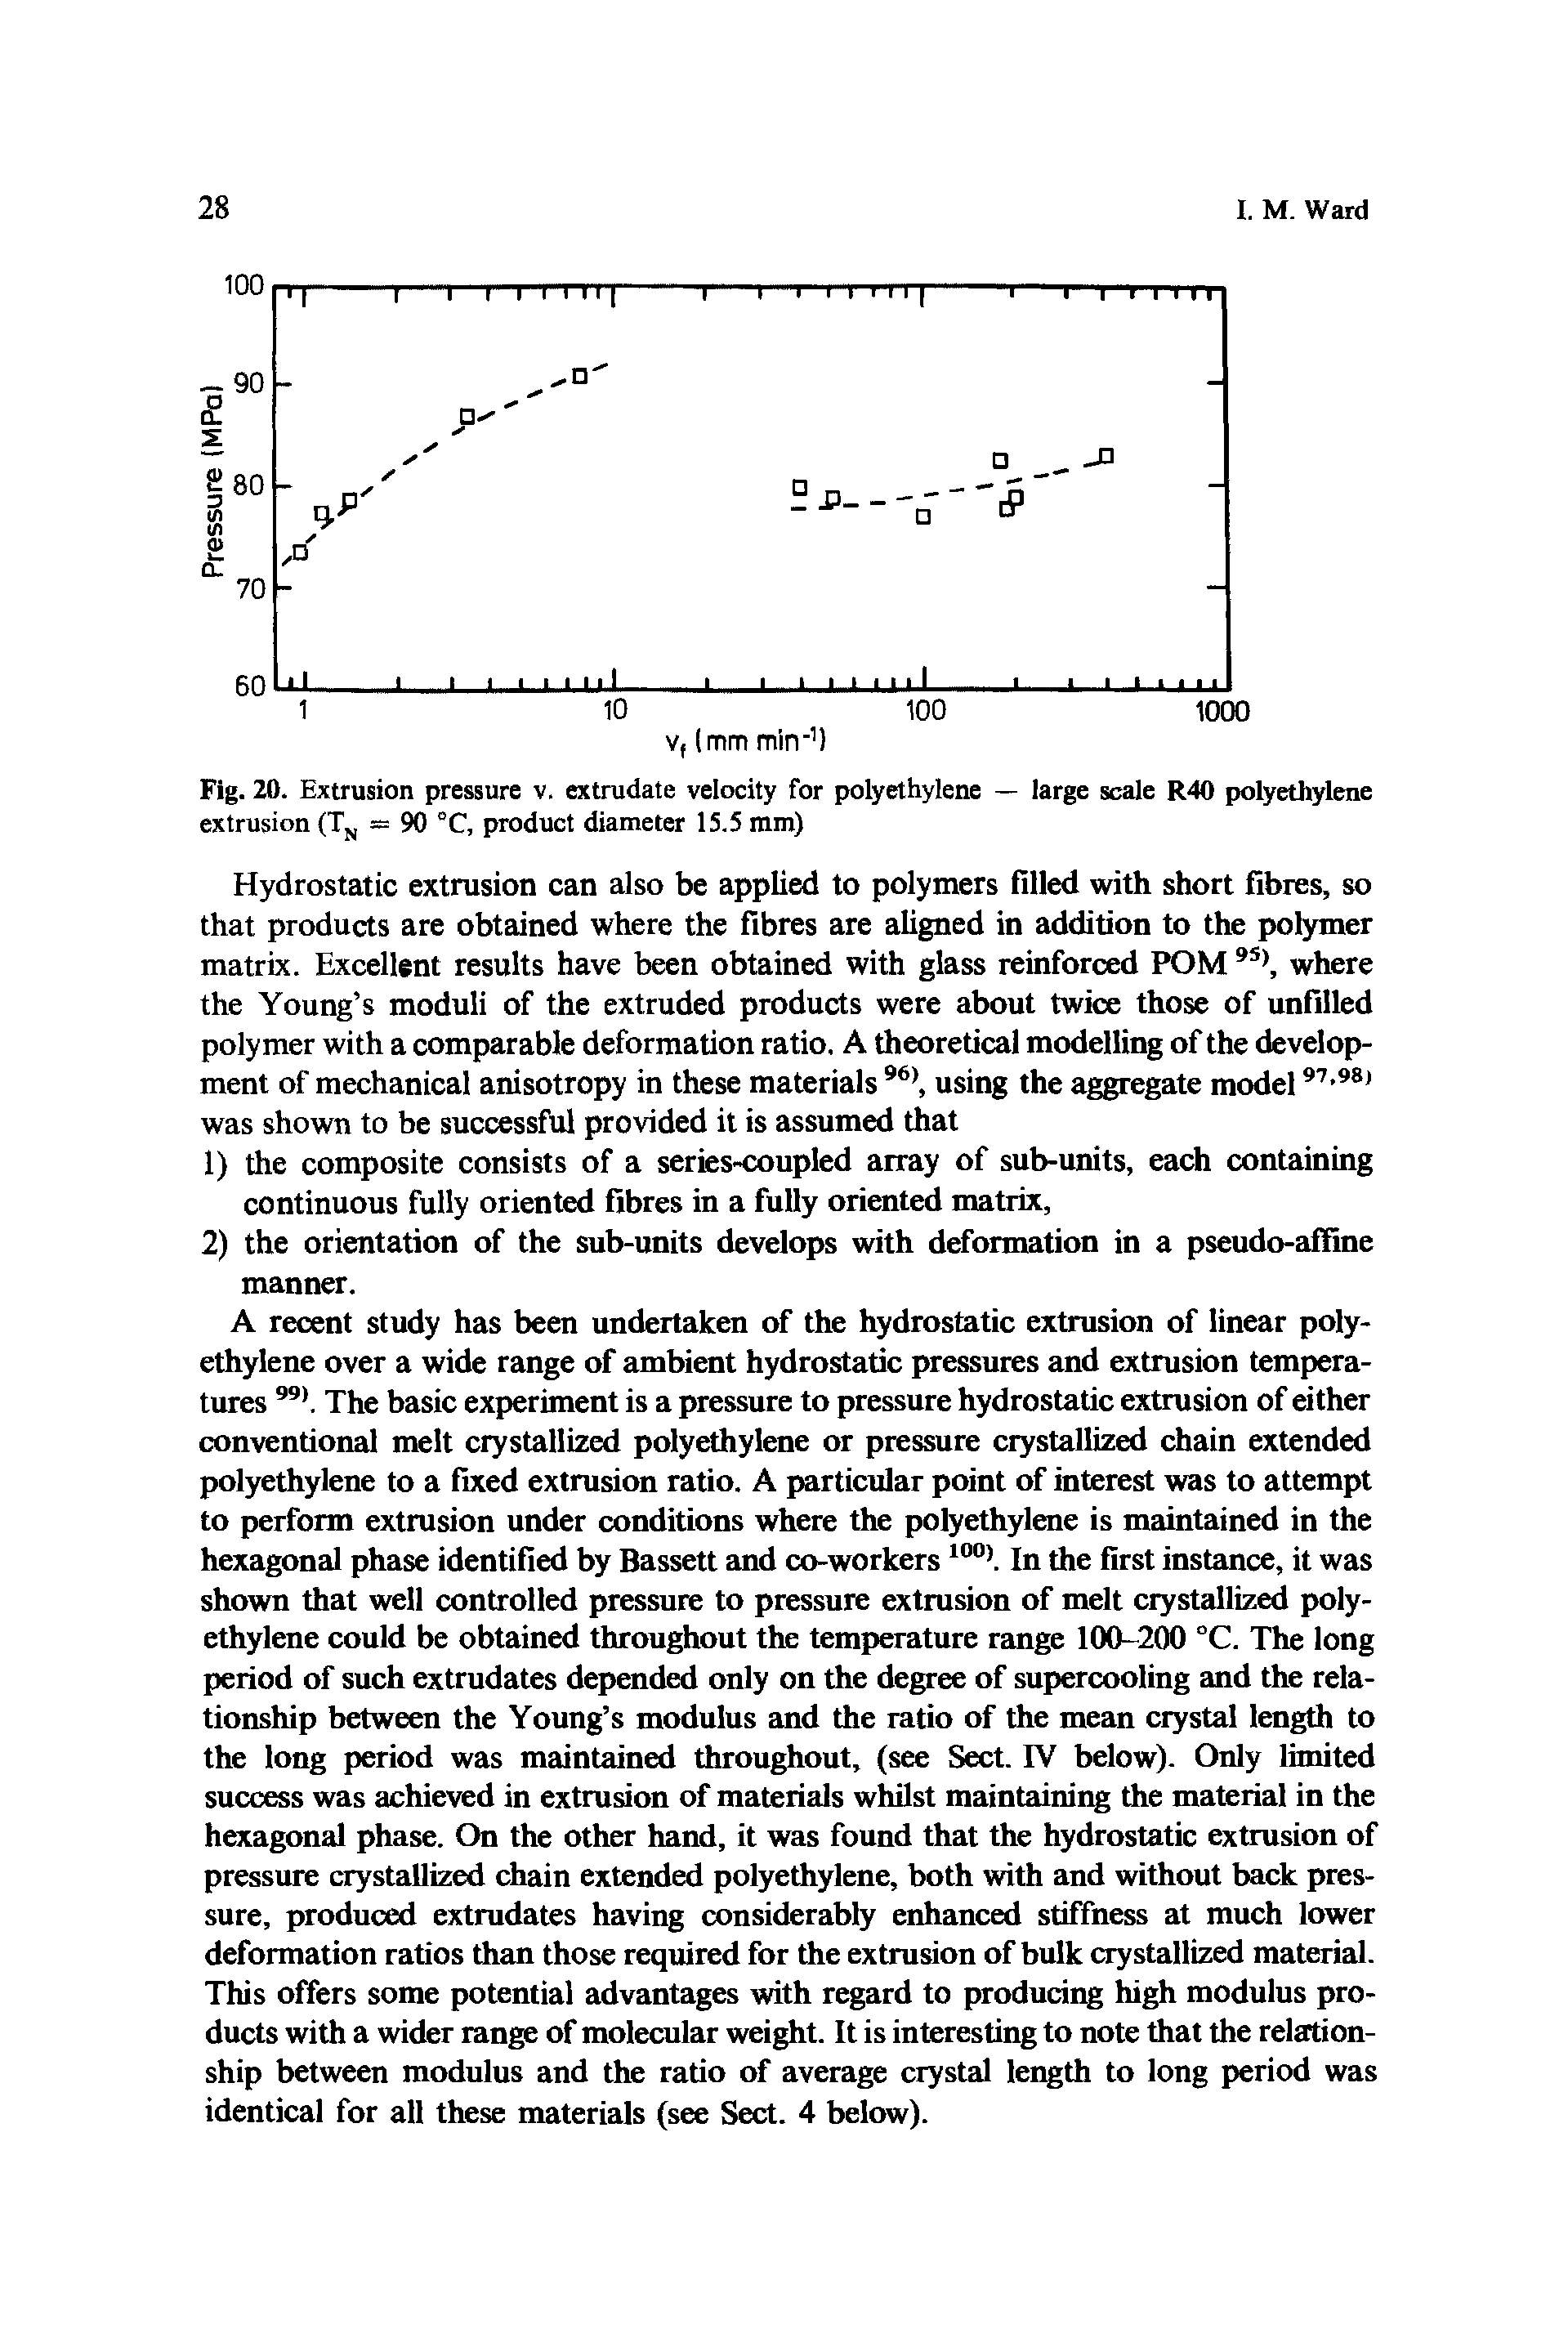 Fig. ZO. Extrusion pressure v. extrudate velocity for polyethylene - large scale R40 polyethylene extrusion (Tj, = 90 °C, product diameter 15.5 mm)...